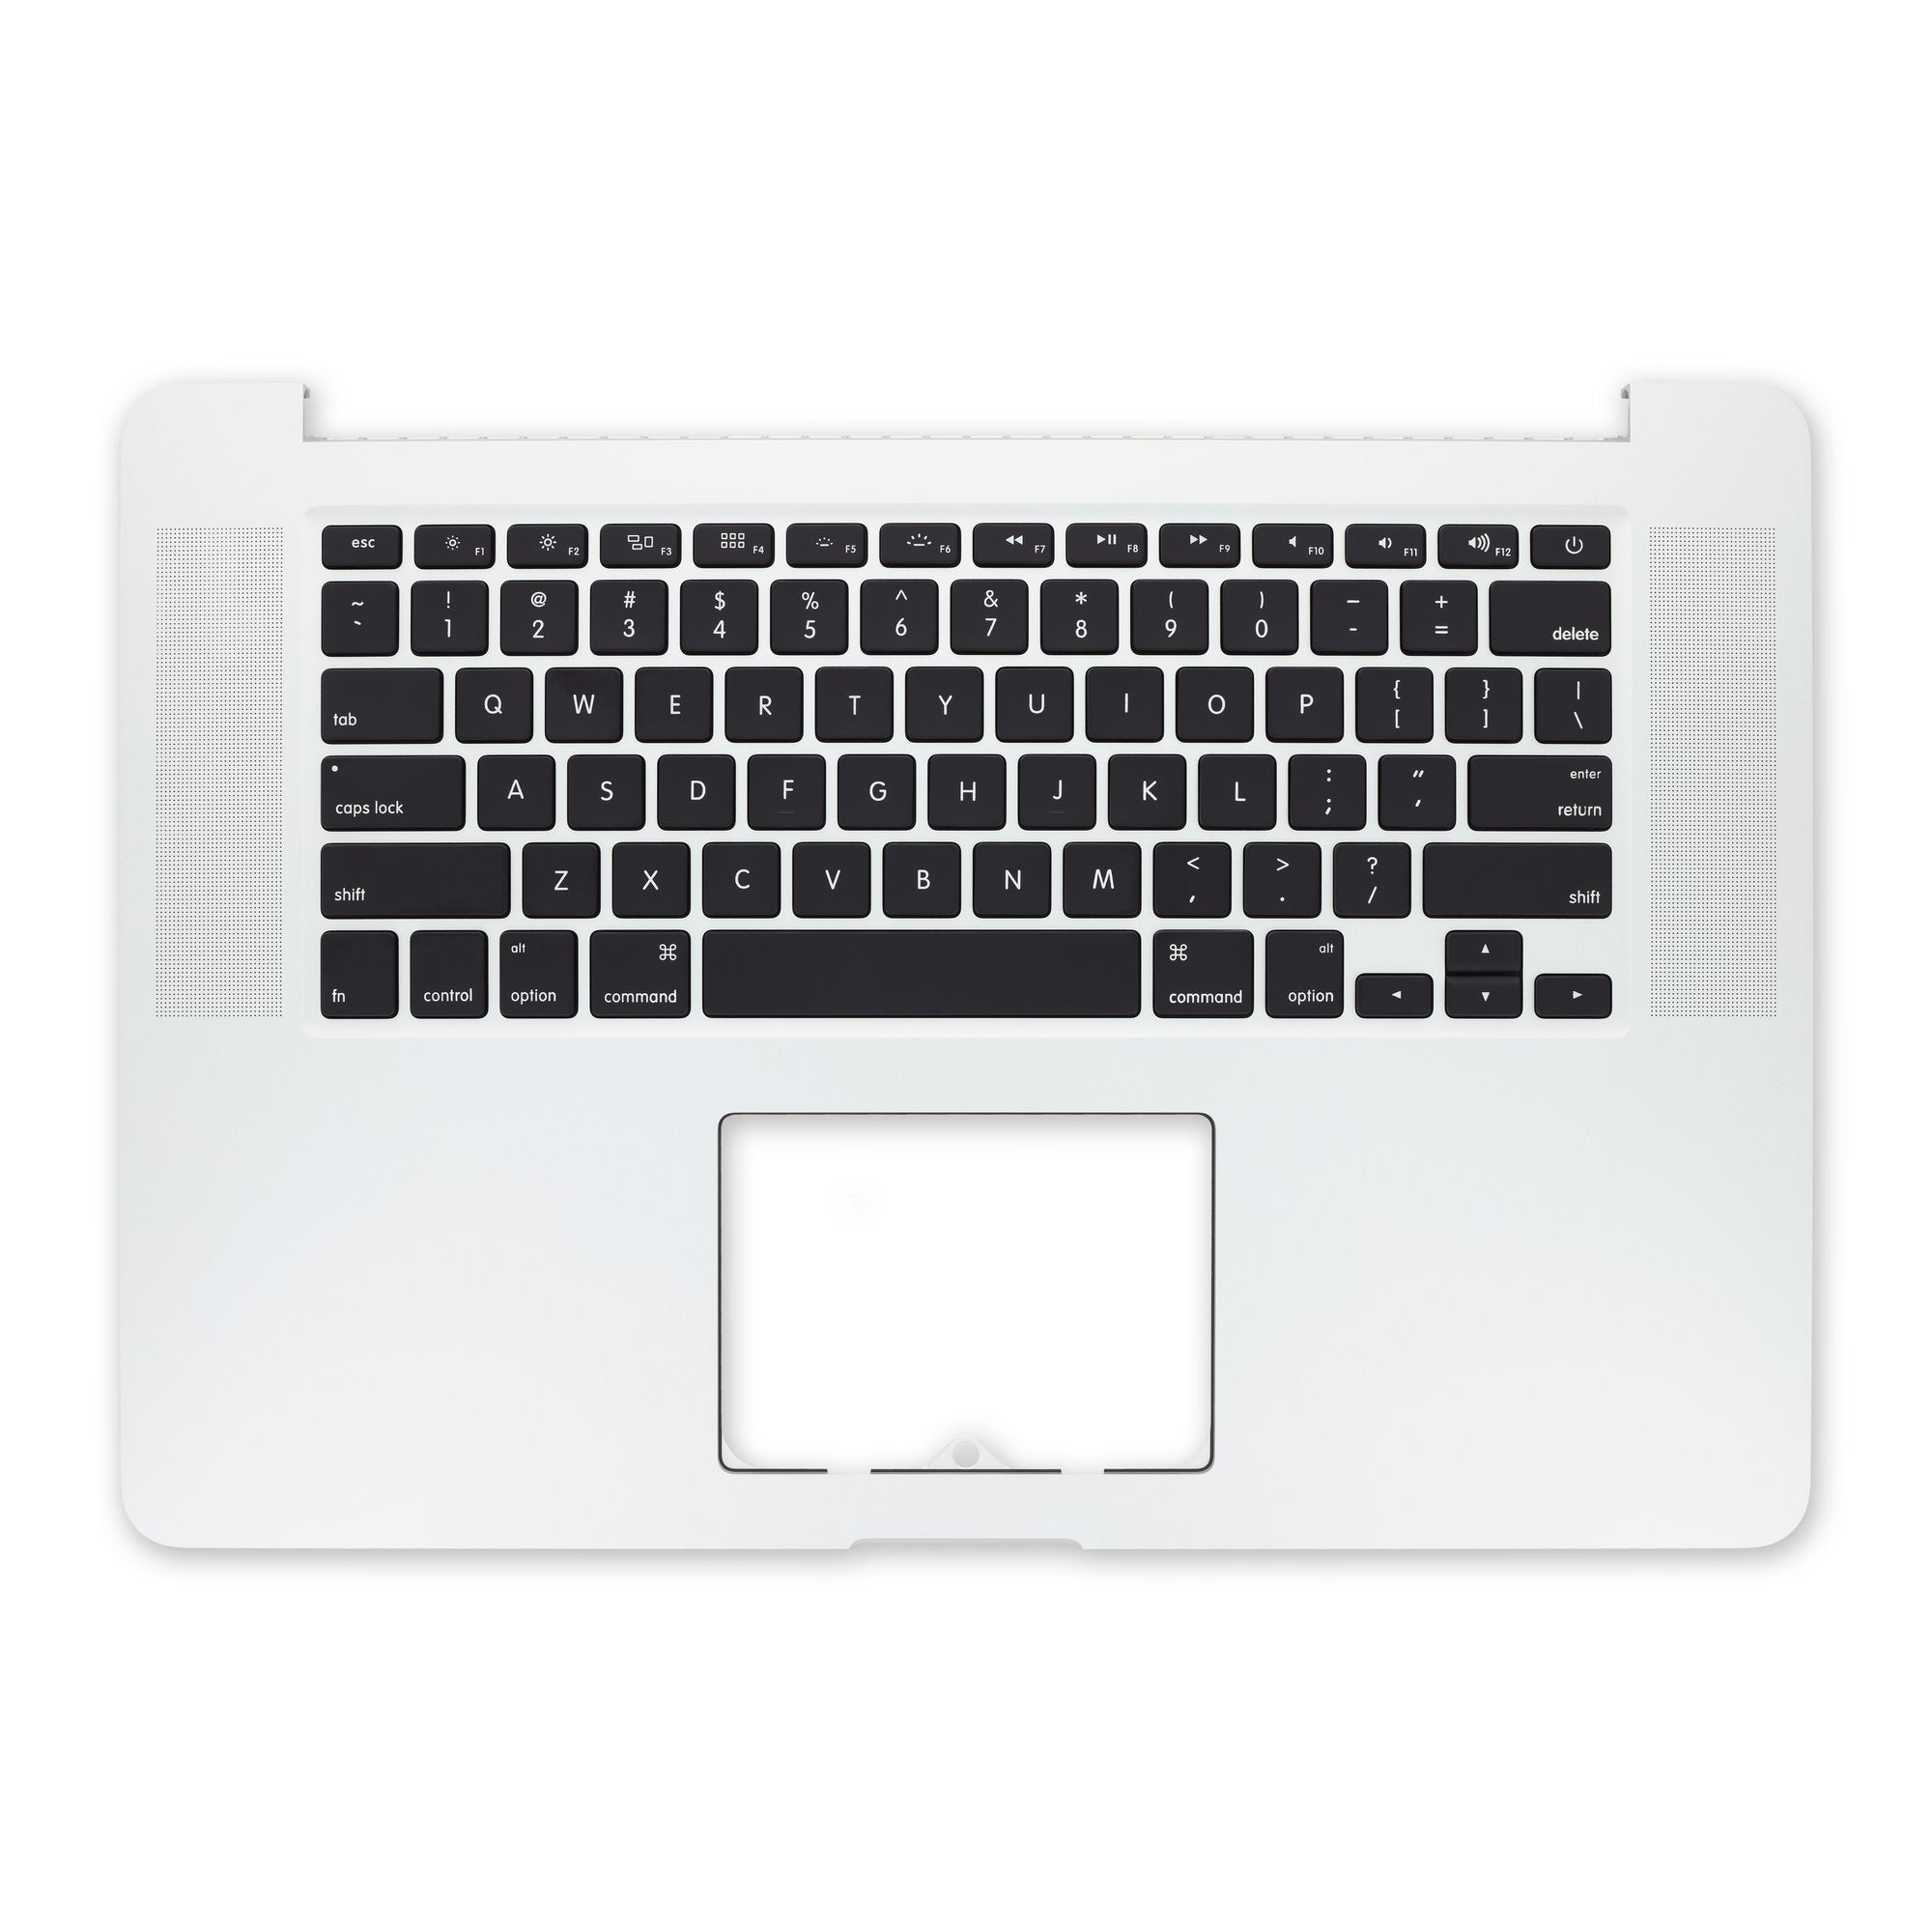 MacBook Pro 15" Retina (Mid 2012-Early 2013) Upper Case Assembly Used, A-Stock No Trackpad or Battery